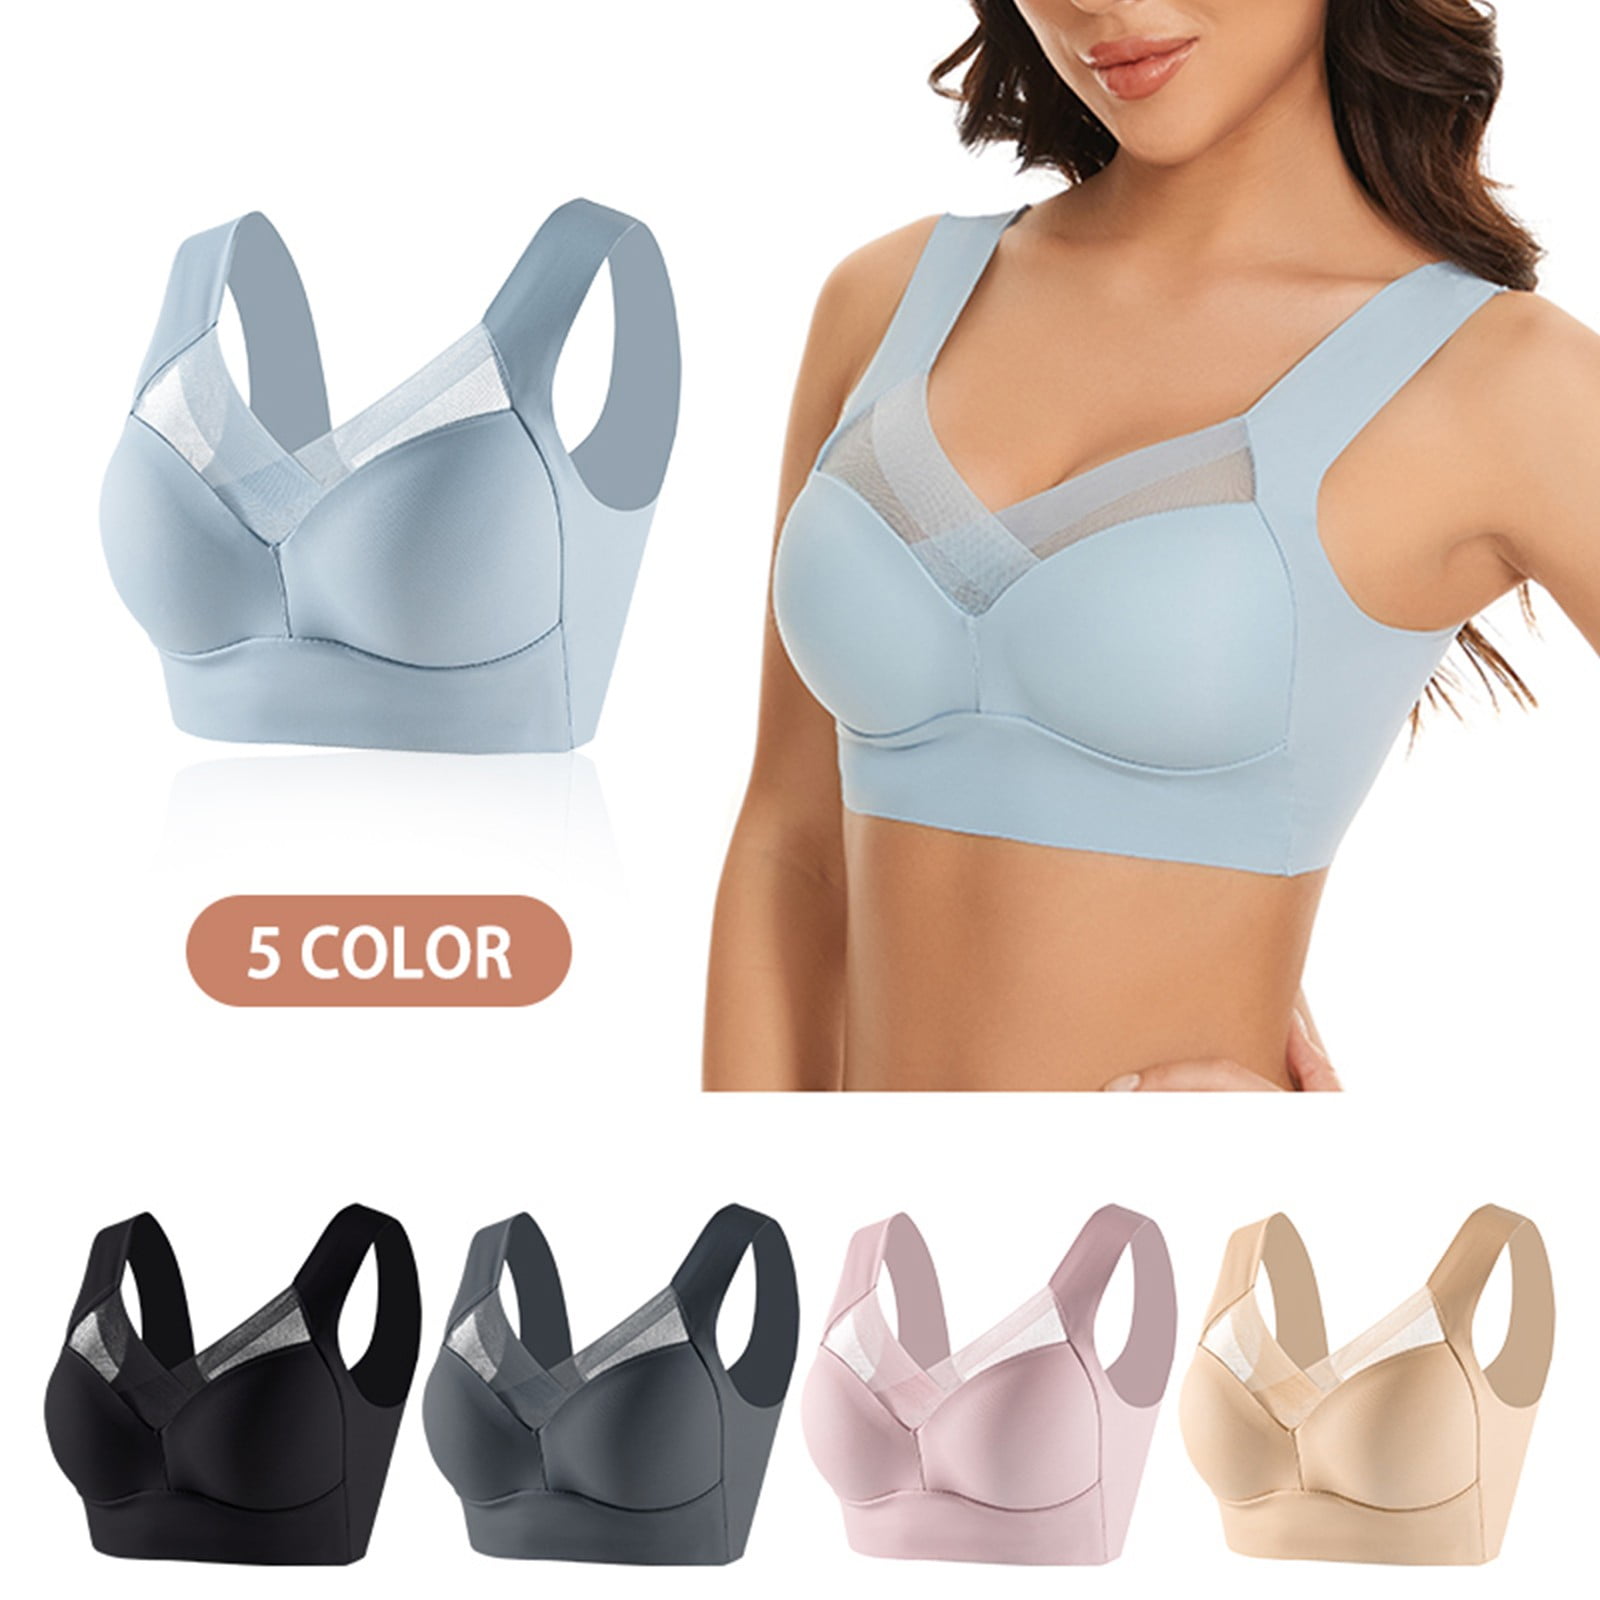 Muses Mall Brassiere Wire Free Stable Beauty Back Bra